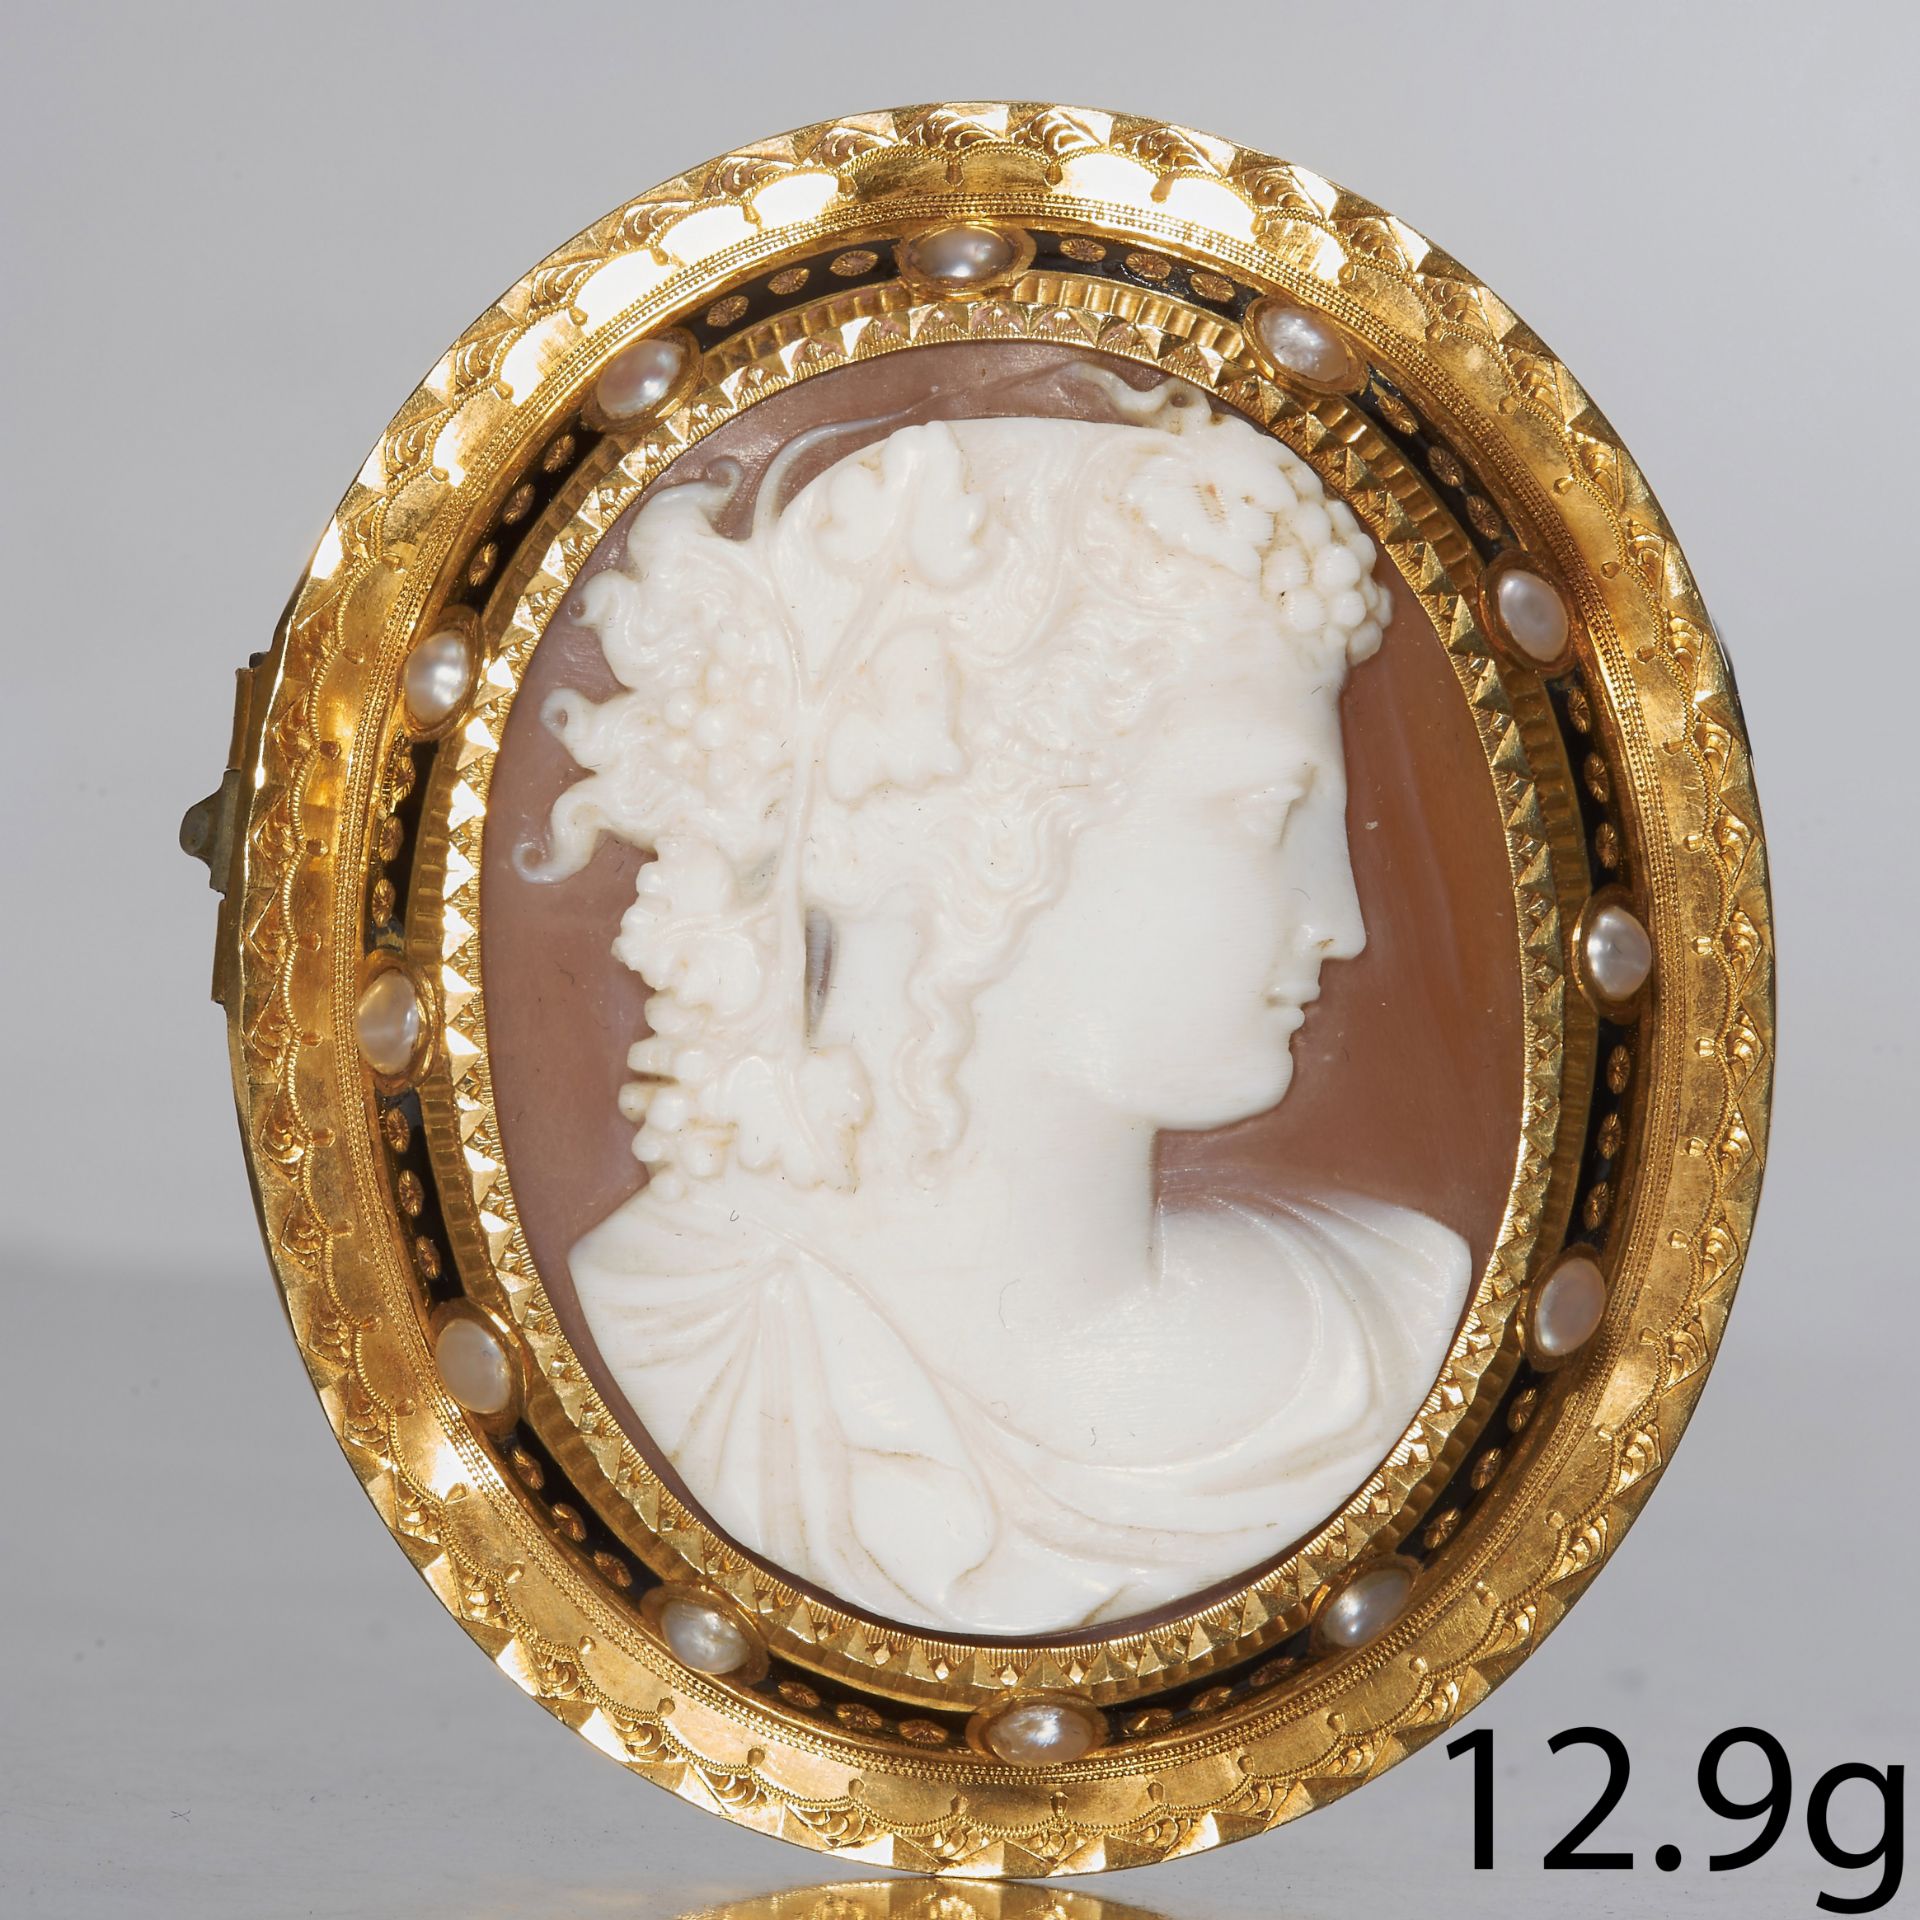 ANTIQUE VICTORIAN CARVED CAMEO AND ENAMEL BROOCH